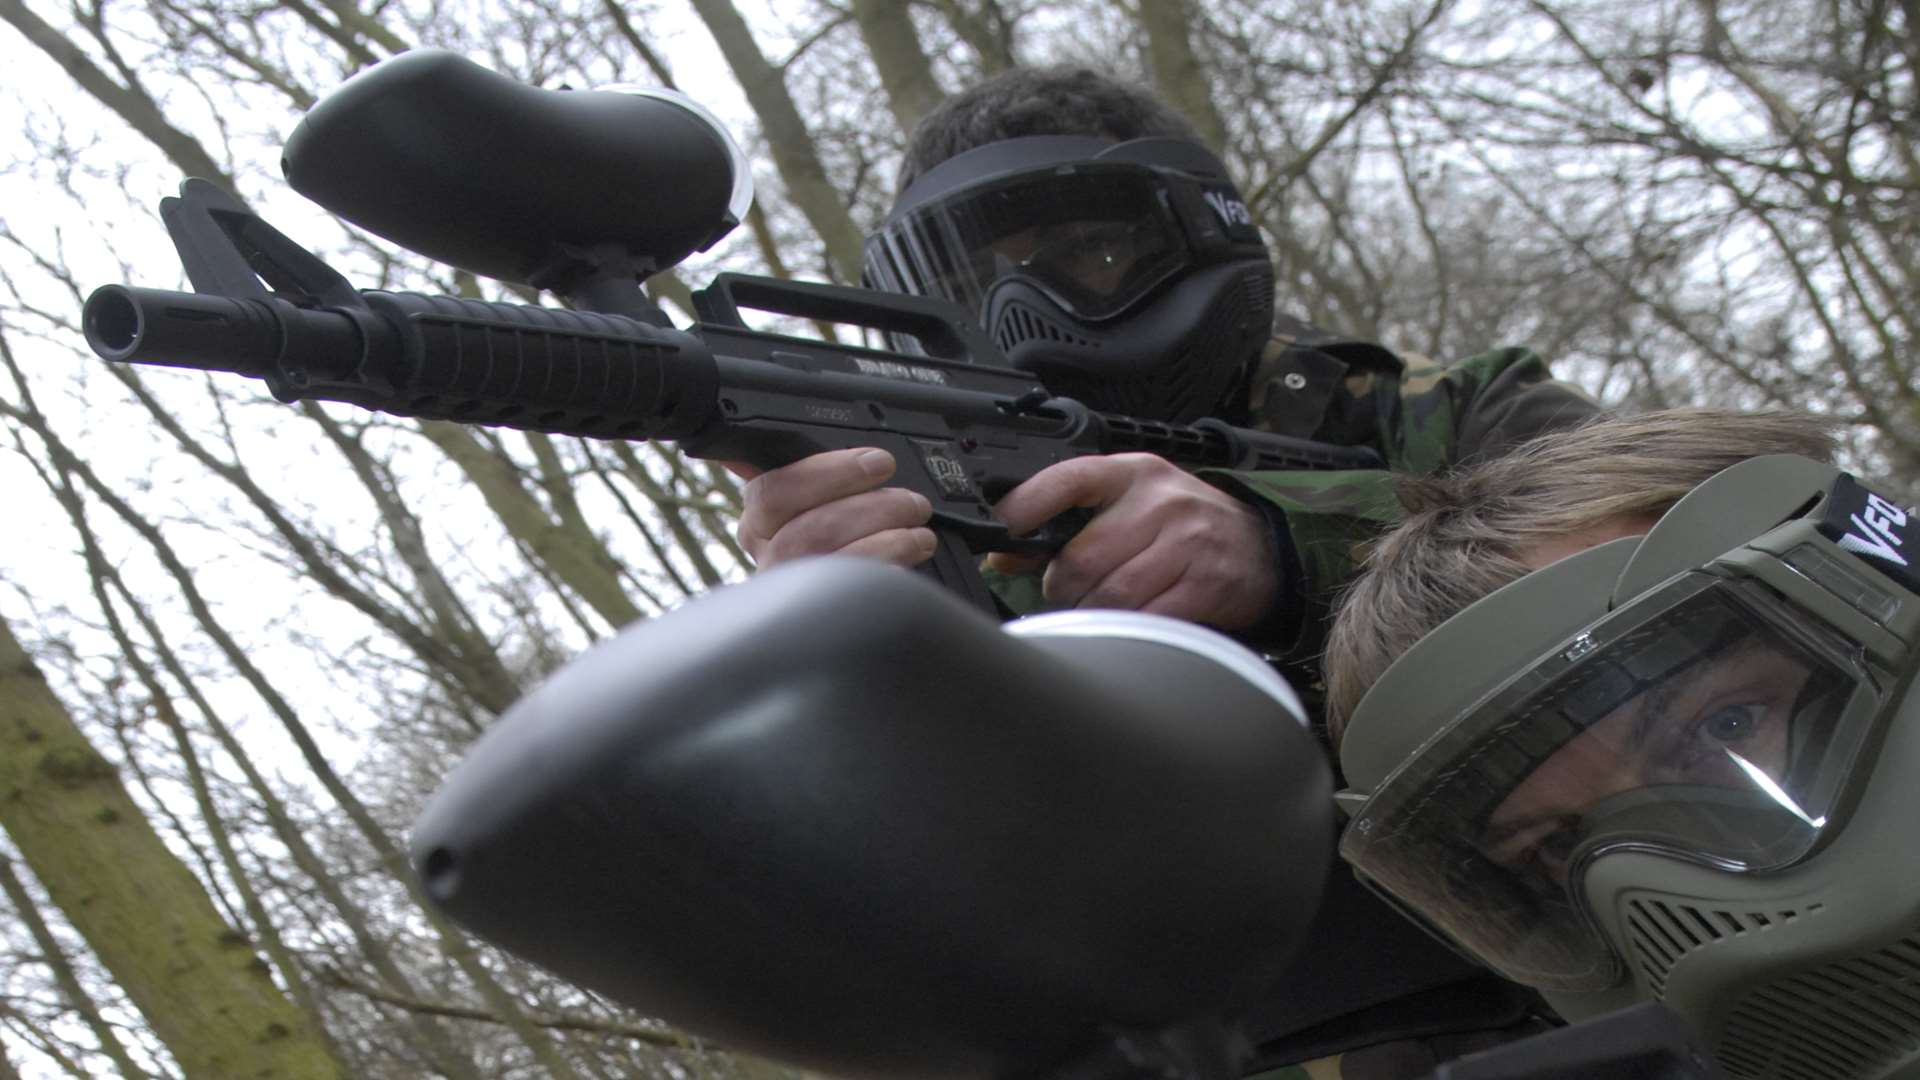 Airsoft is similar to paintballing